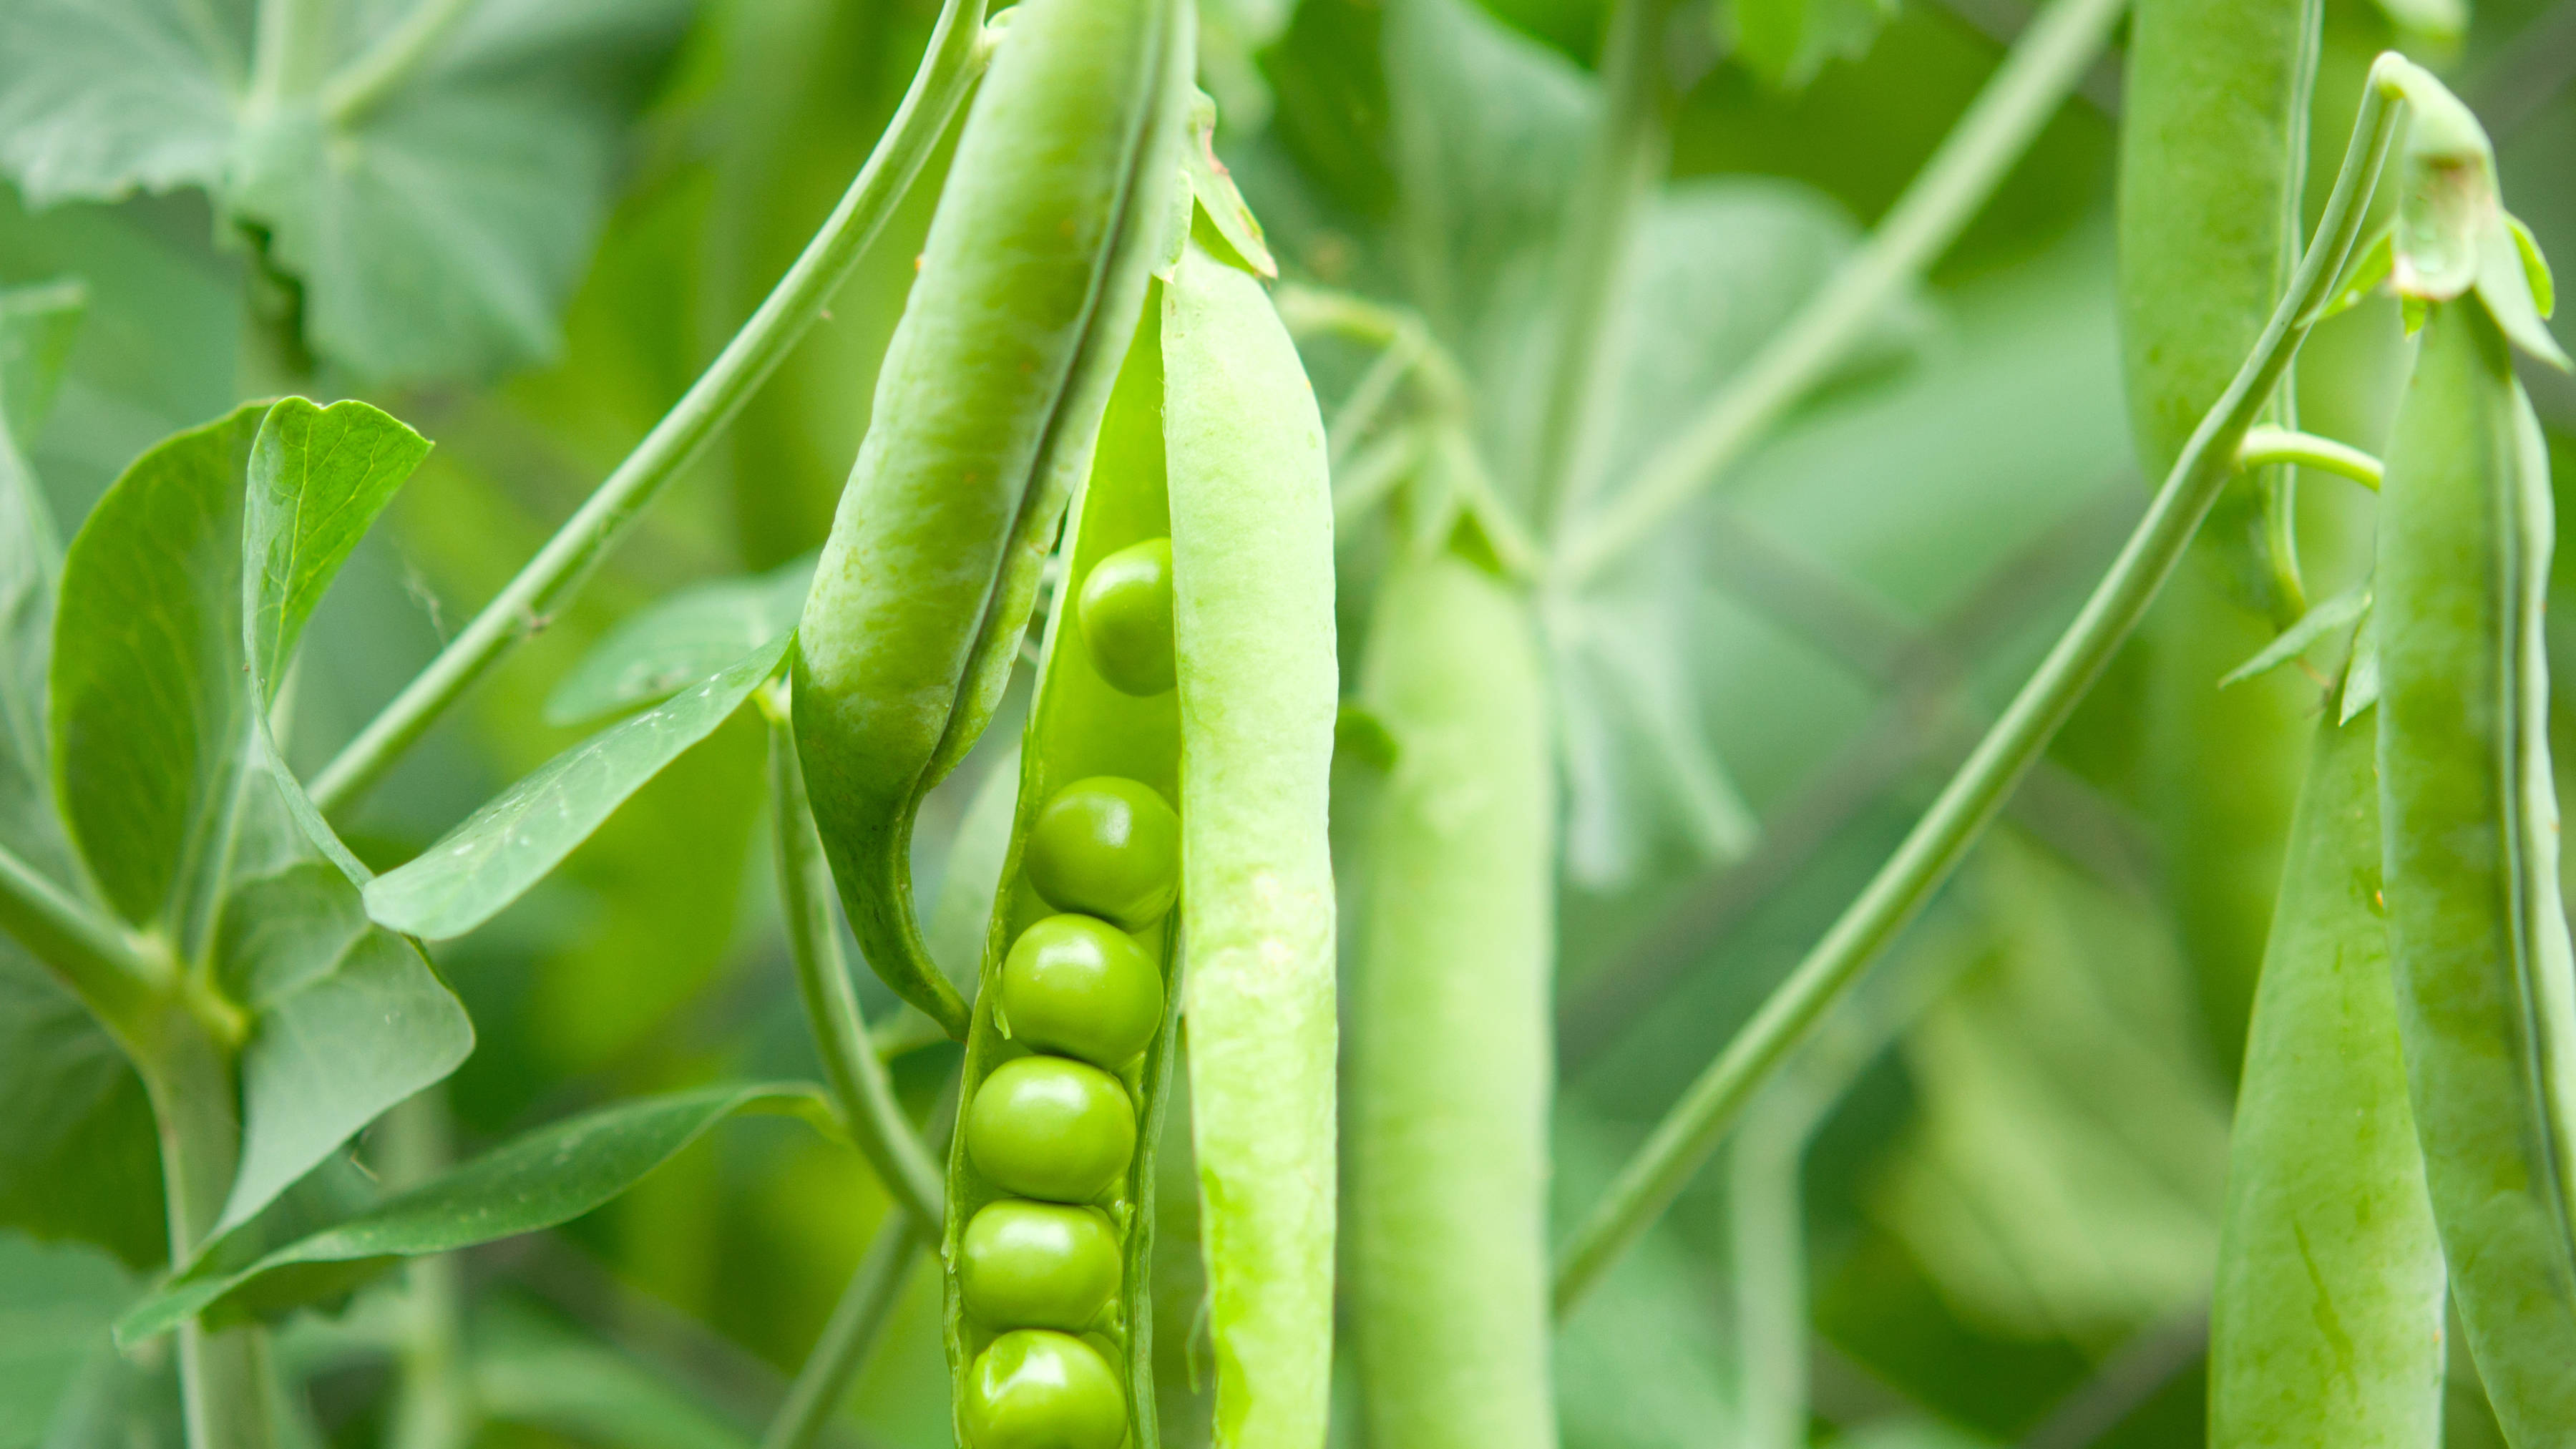 A close image of a pea pod hanging from its plant that has been split open to reveal fresh green peas, while other pods surround it. Photo: ksena32 / iStock.